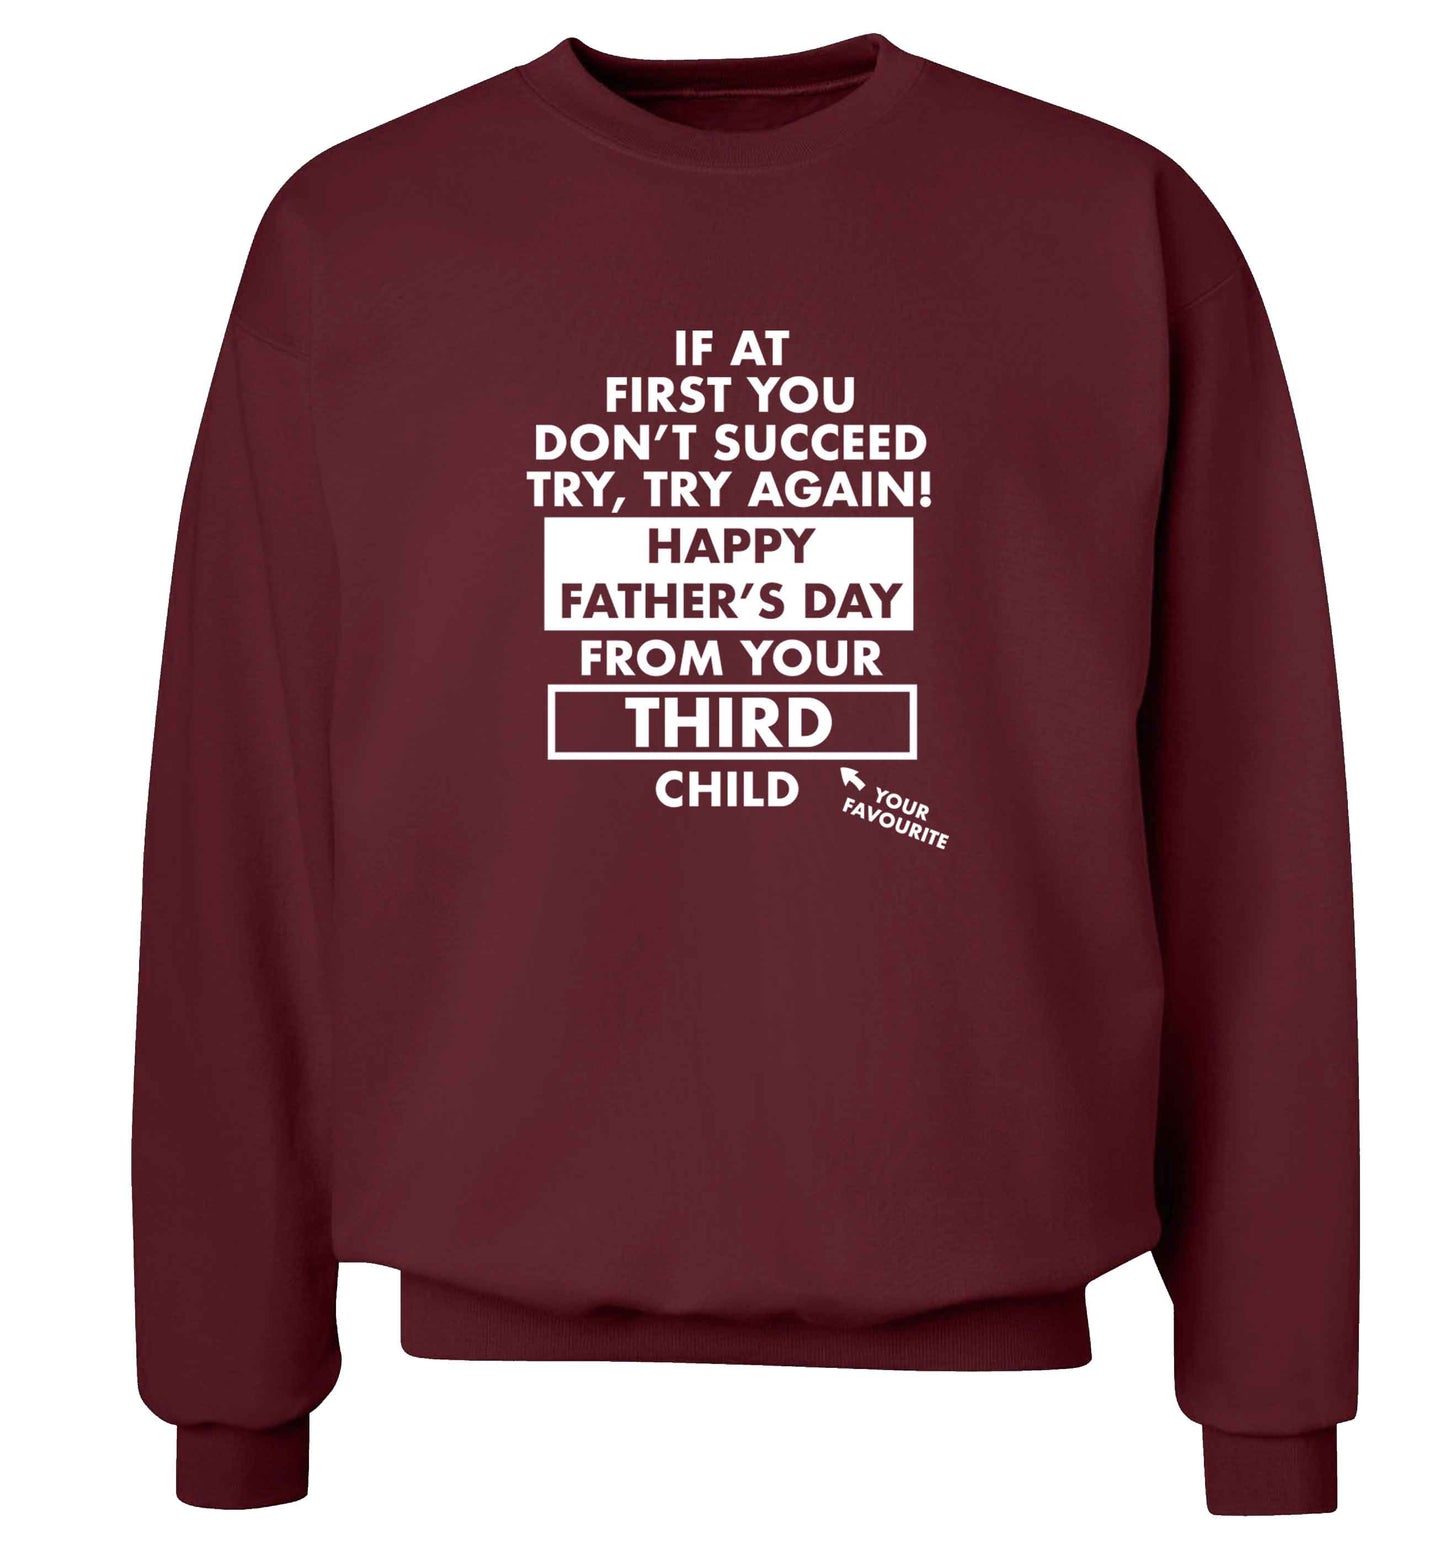 If at first you don't succeed try, try again Happy Father's day from your third child! adult's unisex maroon sweater 2XL